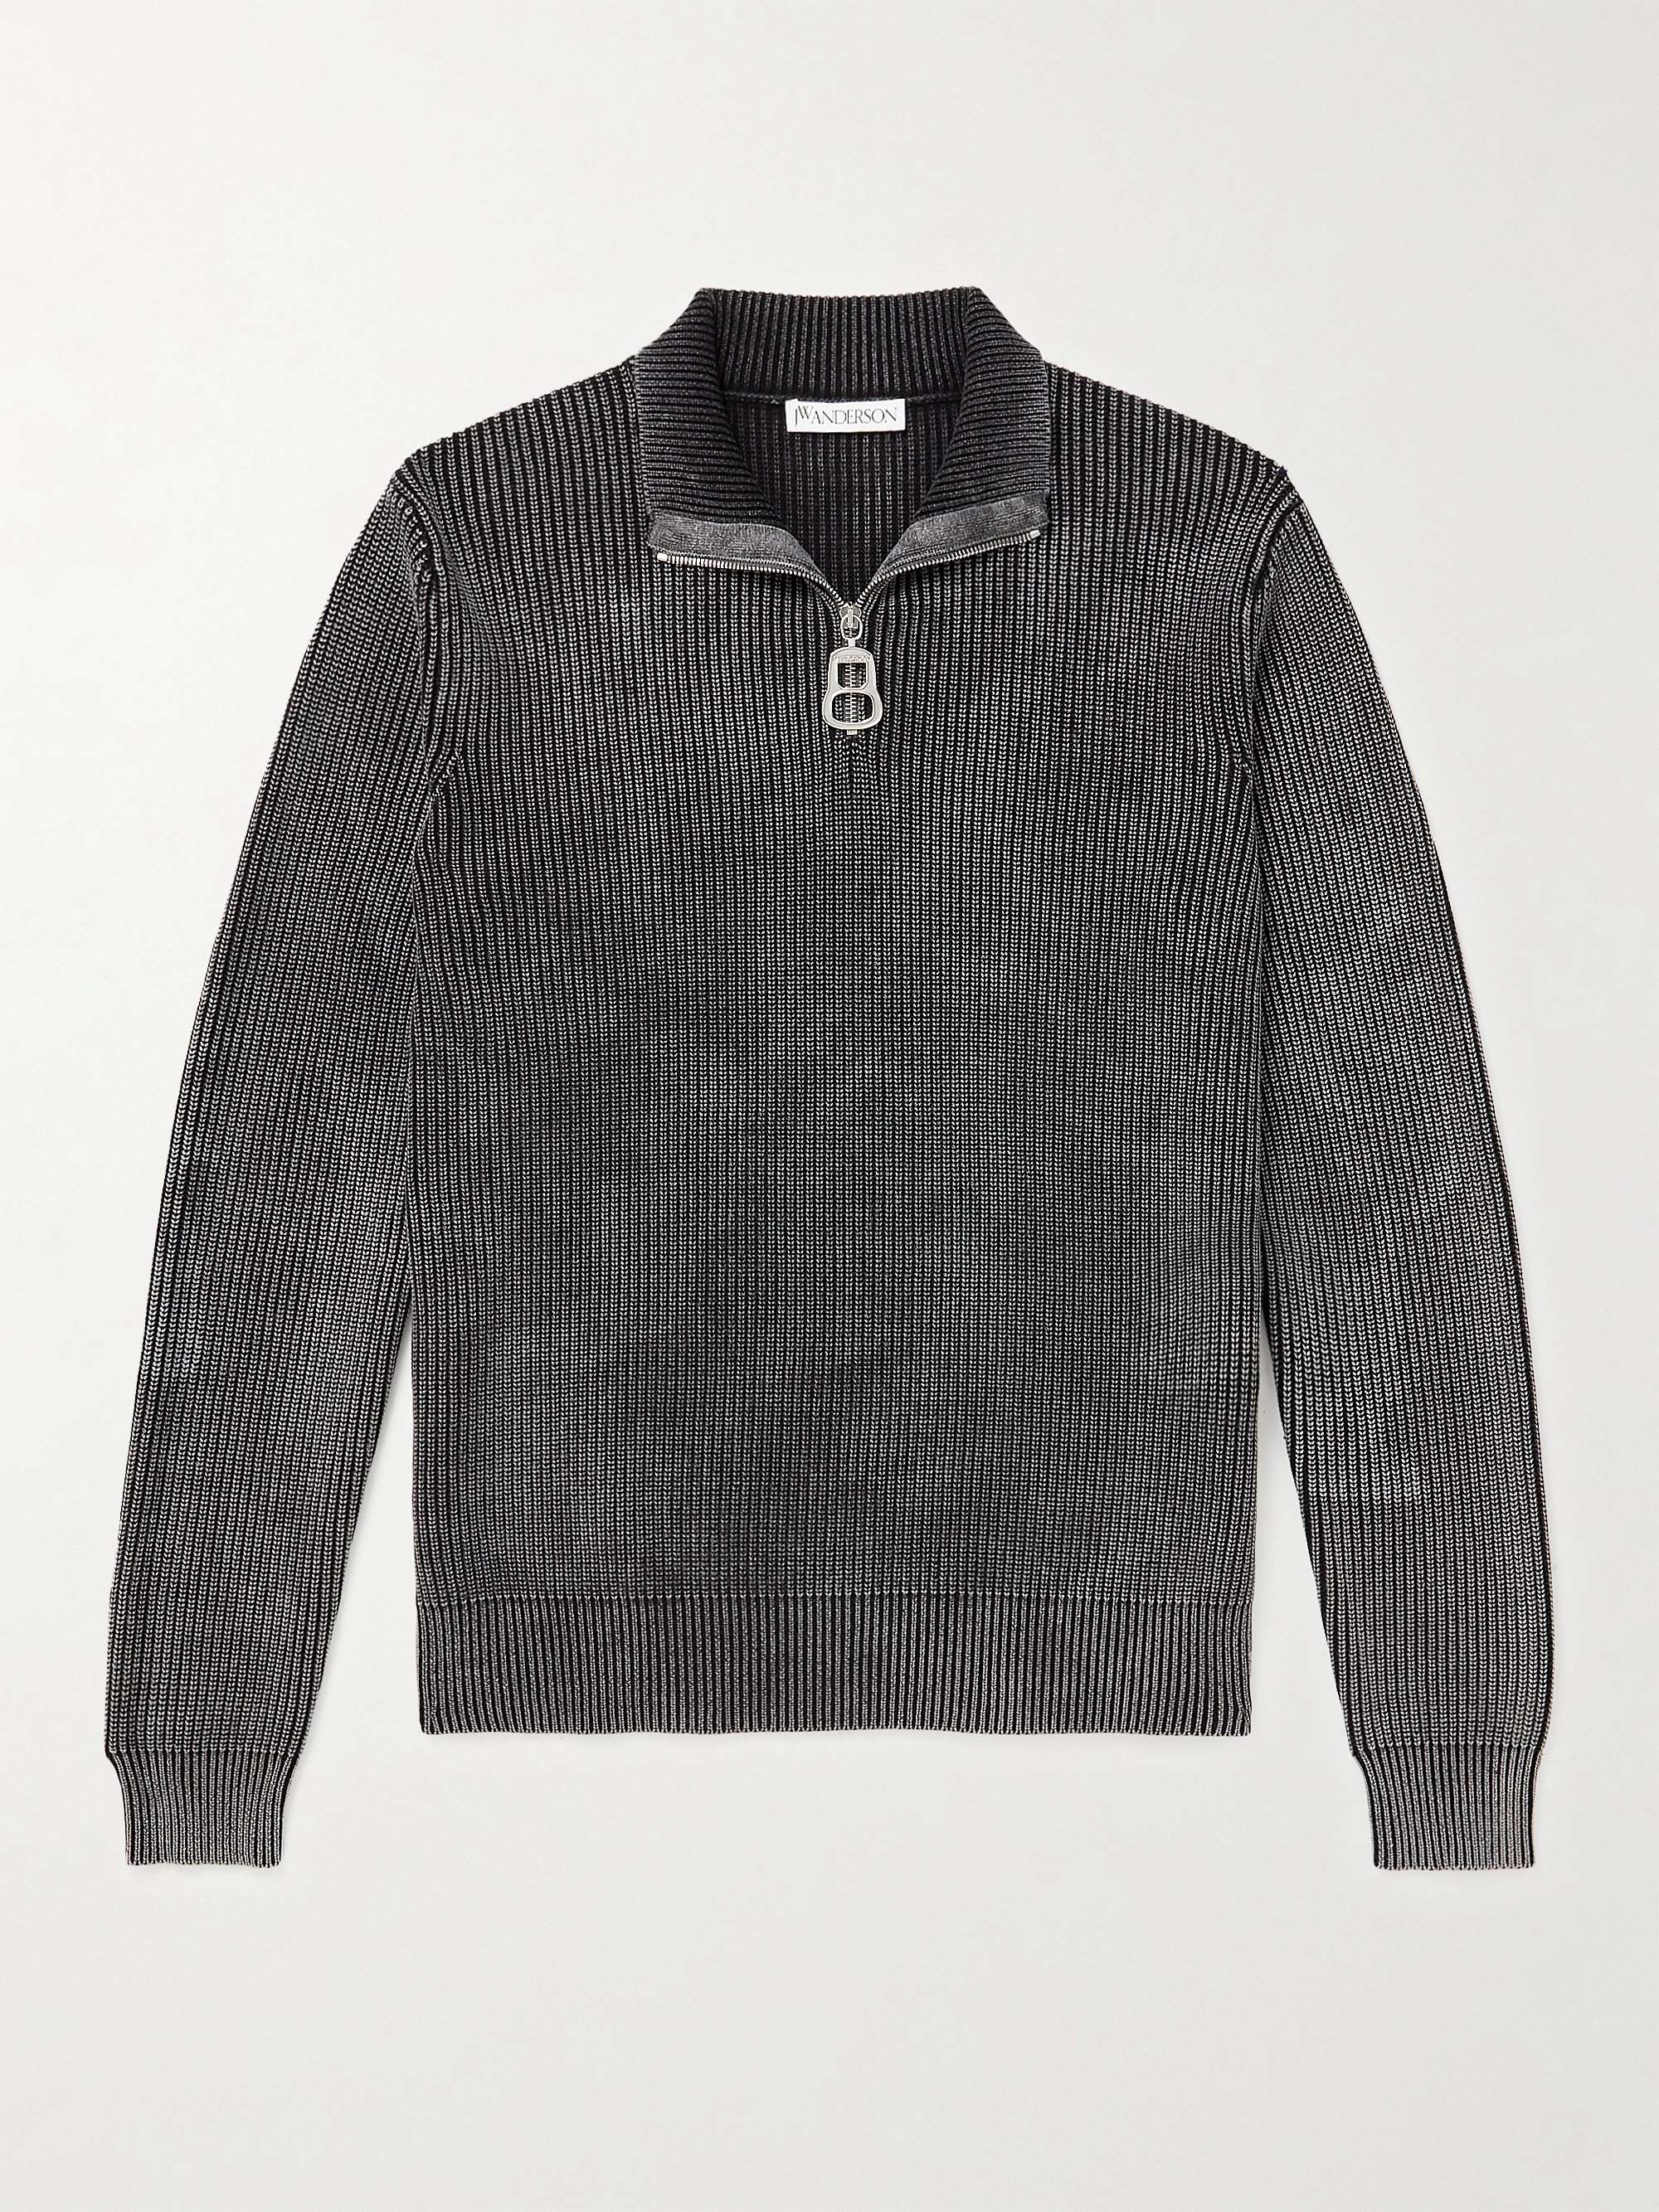 JW ANDERSON Ribbed Cotton Half-Zip Sweater